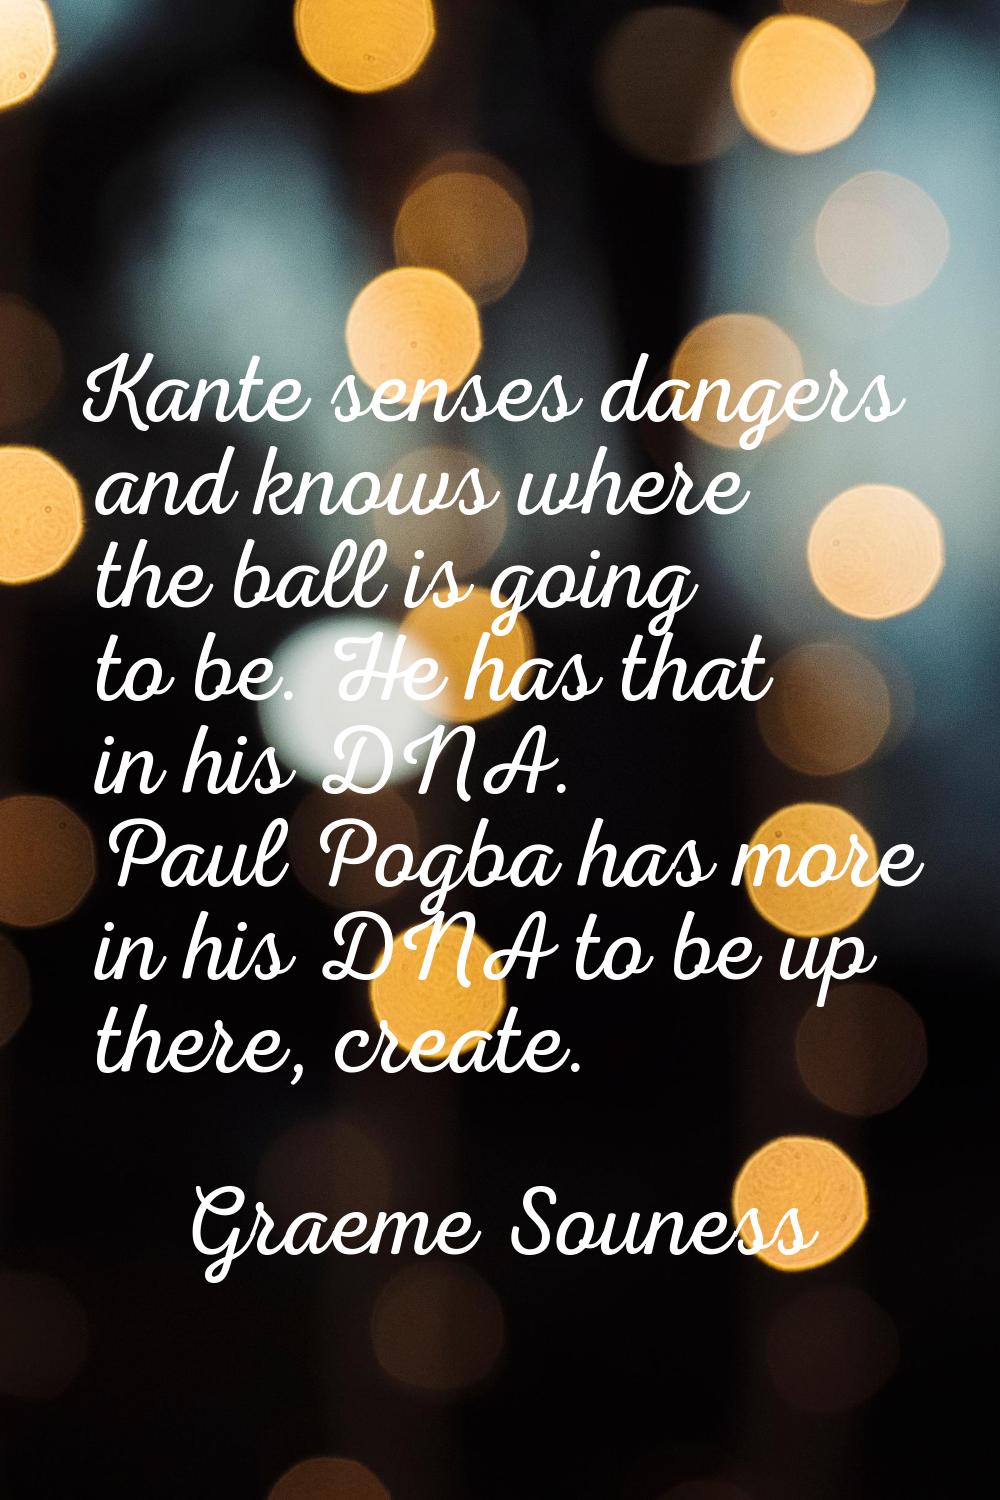 Kante senses dangers and knows where the ball is going to be. He has that in his DNA. Paul Pogba ha